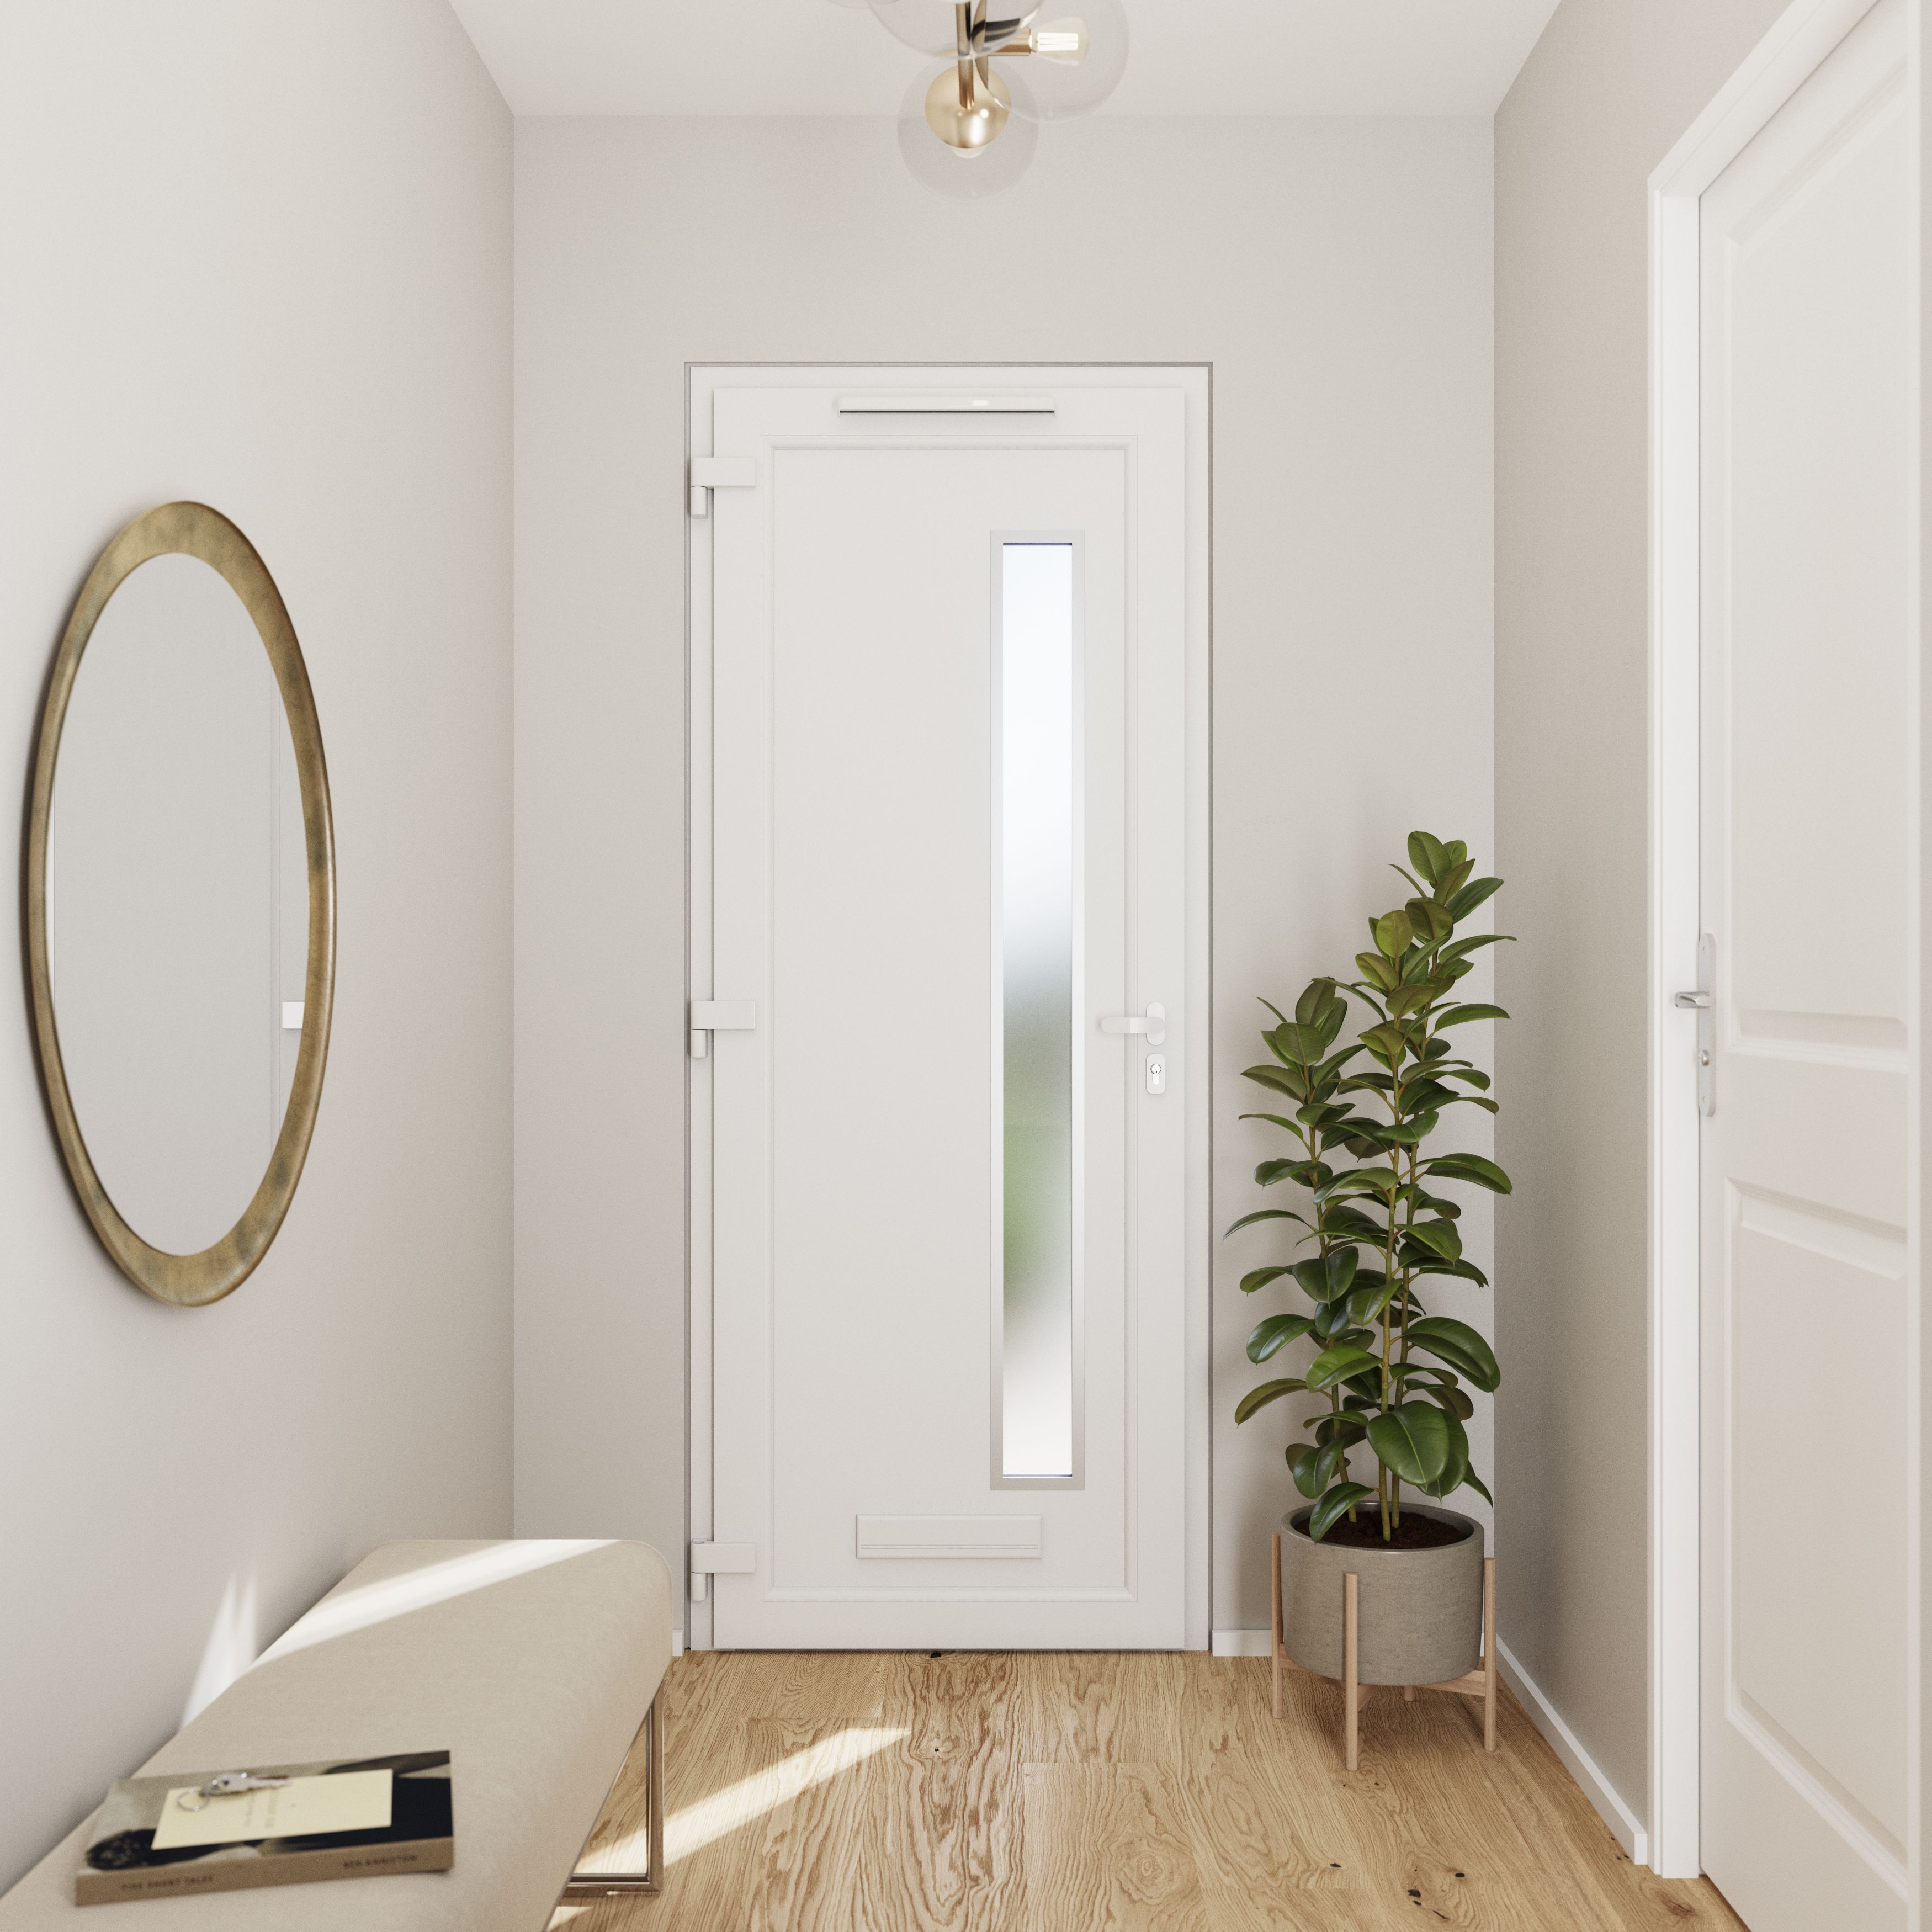 Fortia Gatteo Frosted Glazed Antracite RH External Front Door set, (H)2085mm (W)920mm